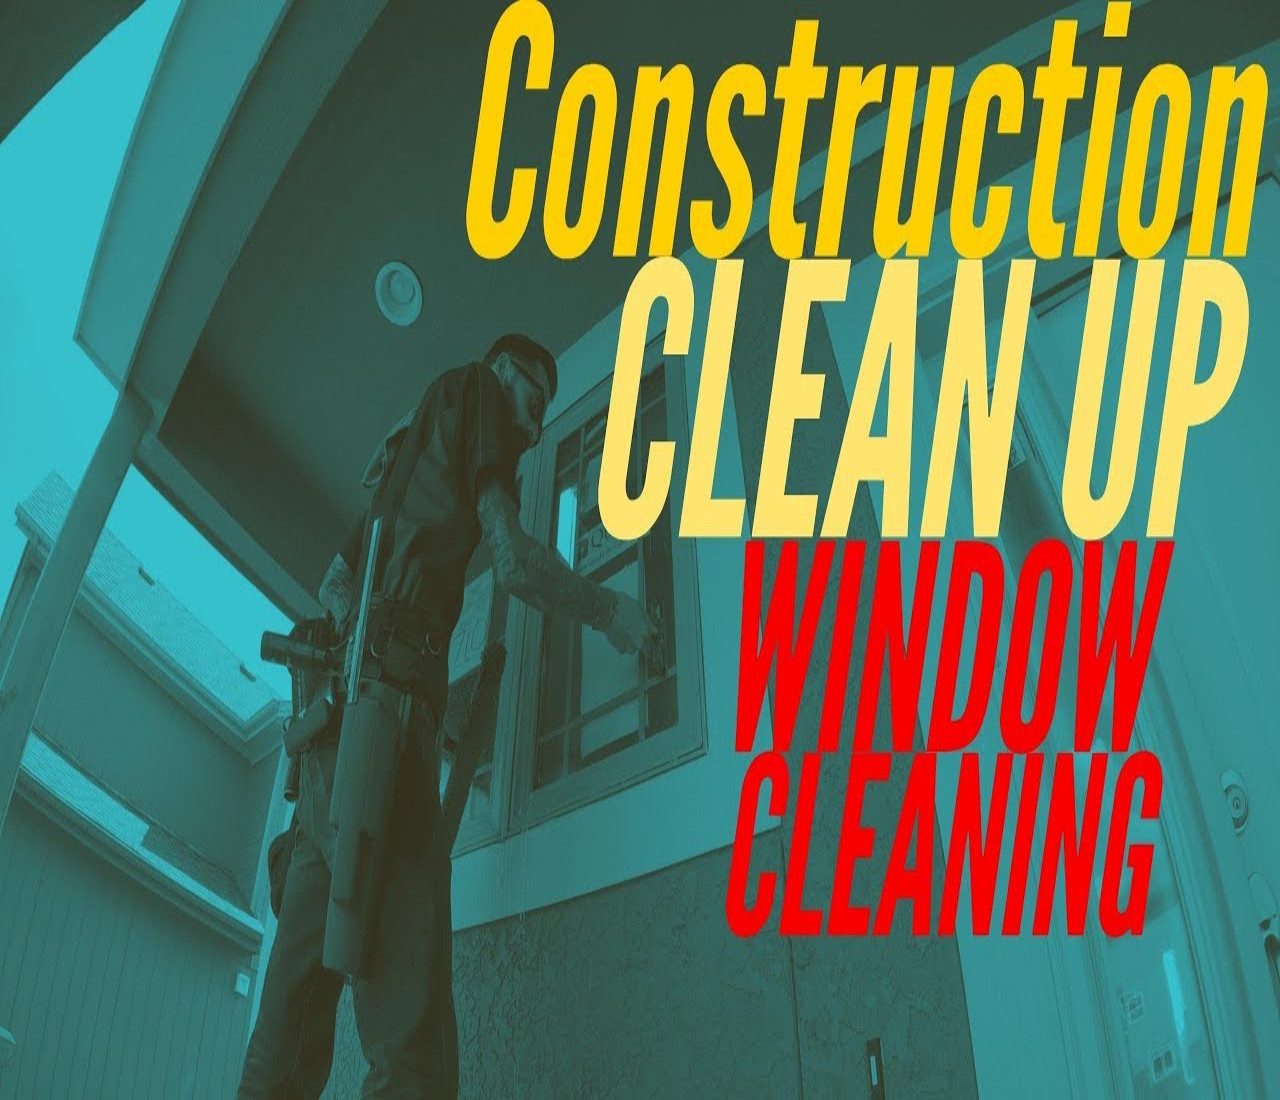 Know before booking our post construction window cleaning services: